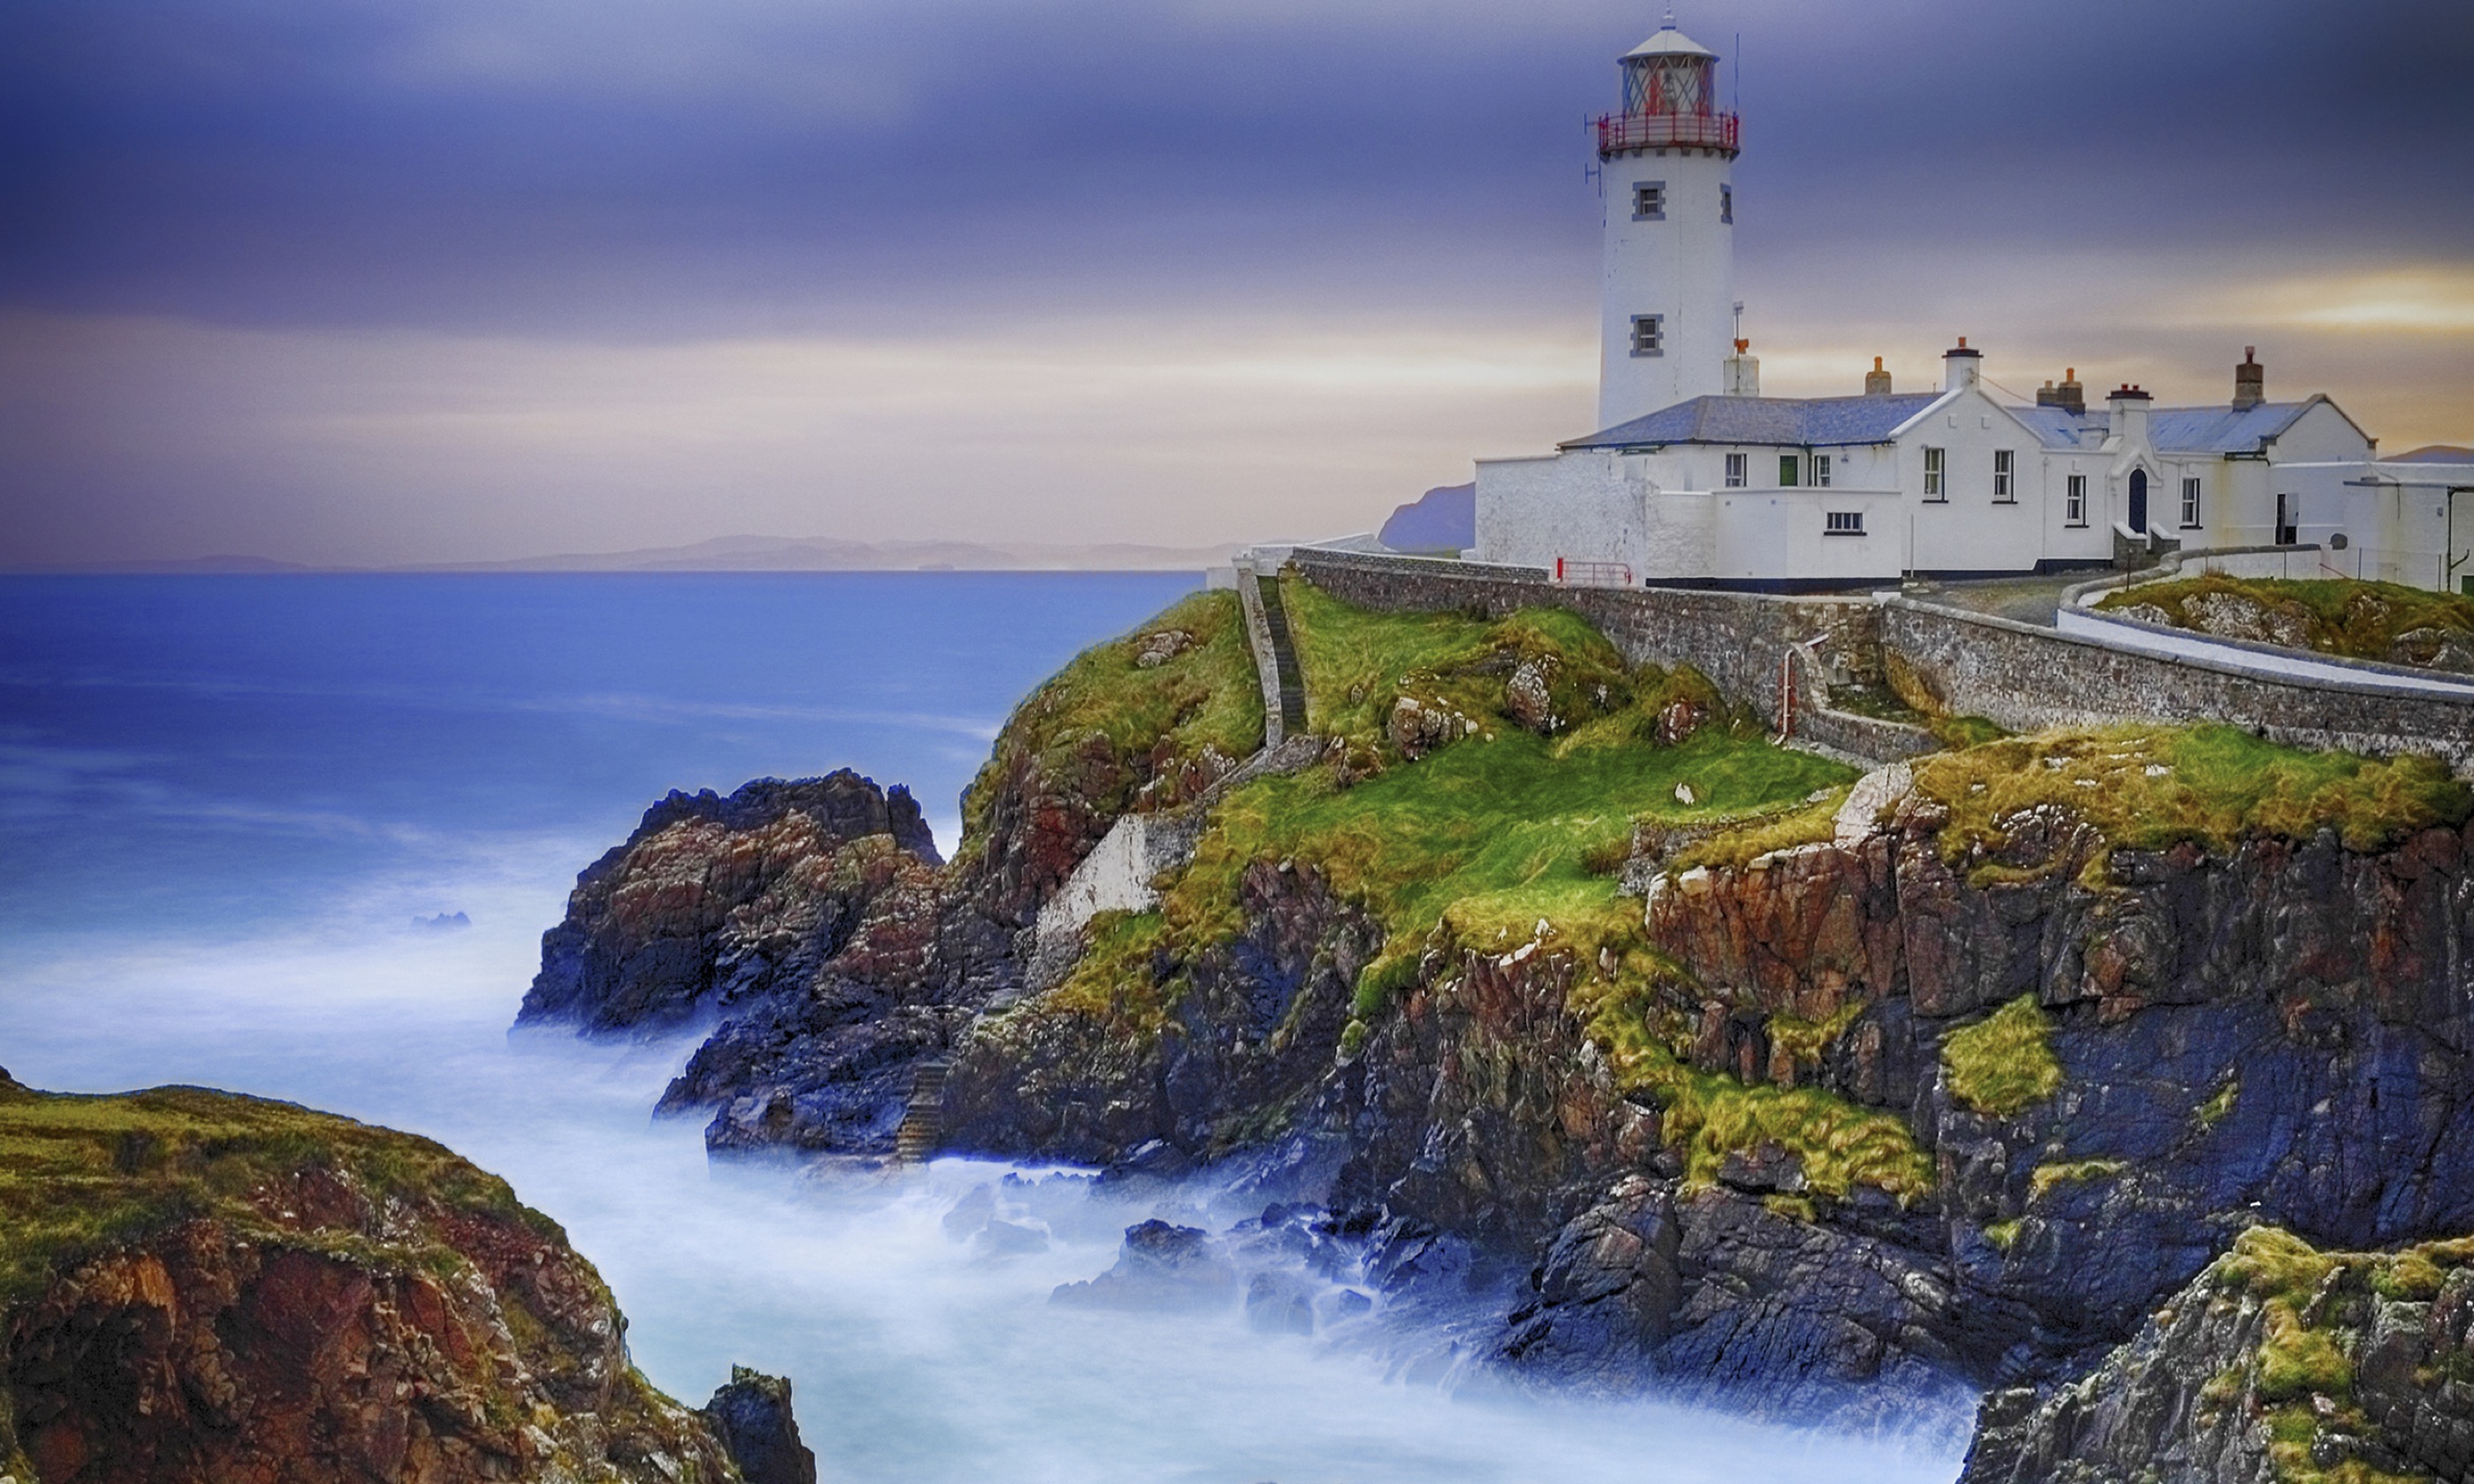 Fanned lighthouse, County Donegal (Shutterstock: see main credit below)